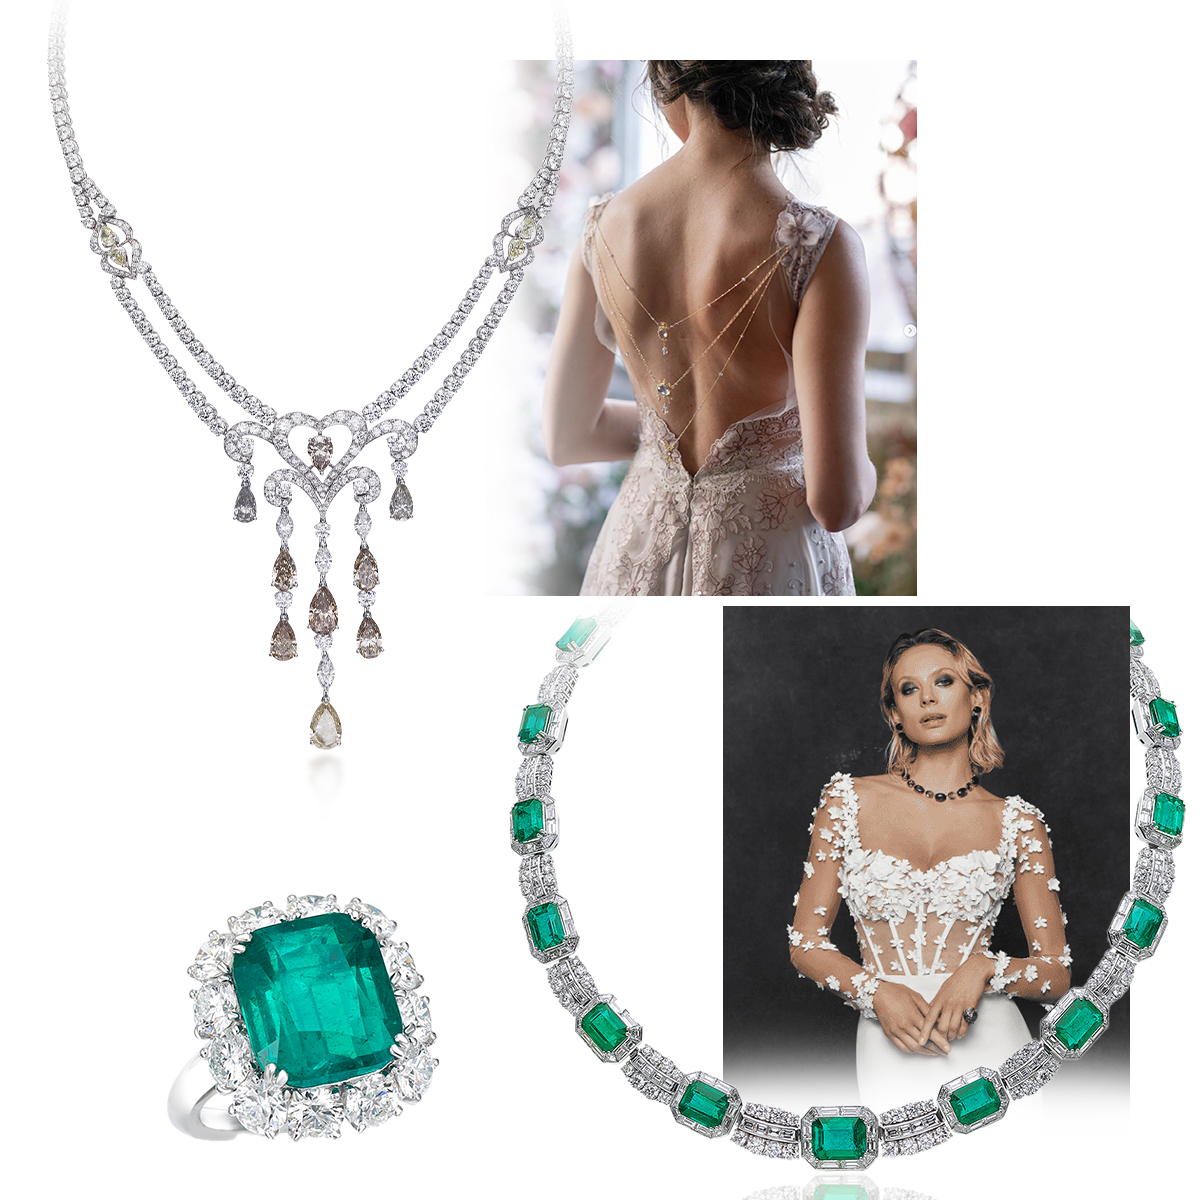 Clockwise from upper right – Claire Pettibone F/W 2023, Justin Alexander F/W 2023, PICCHIOTTI Fit for a Queen necklace, PICCHIOTTI Emerald engagement ring, PICCHIOTTI Chandelier necklace